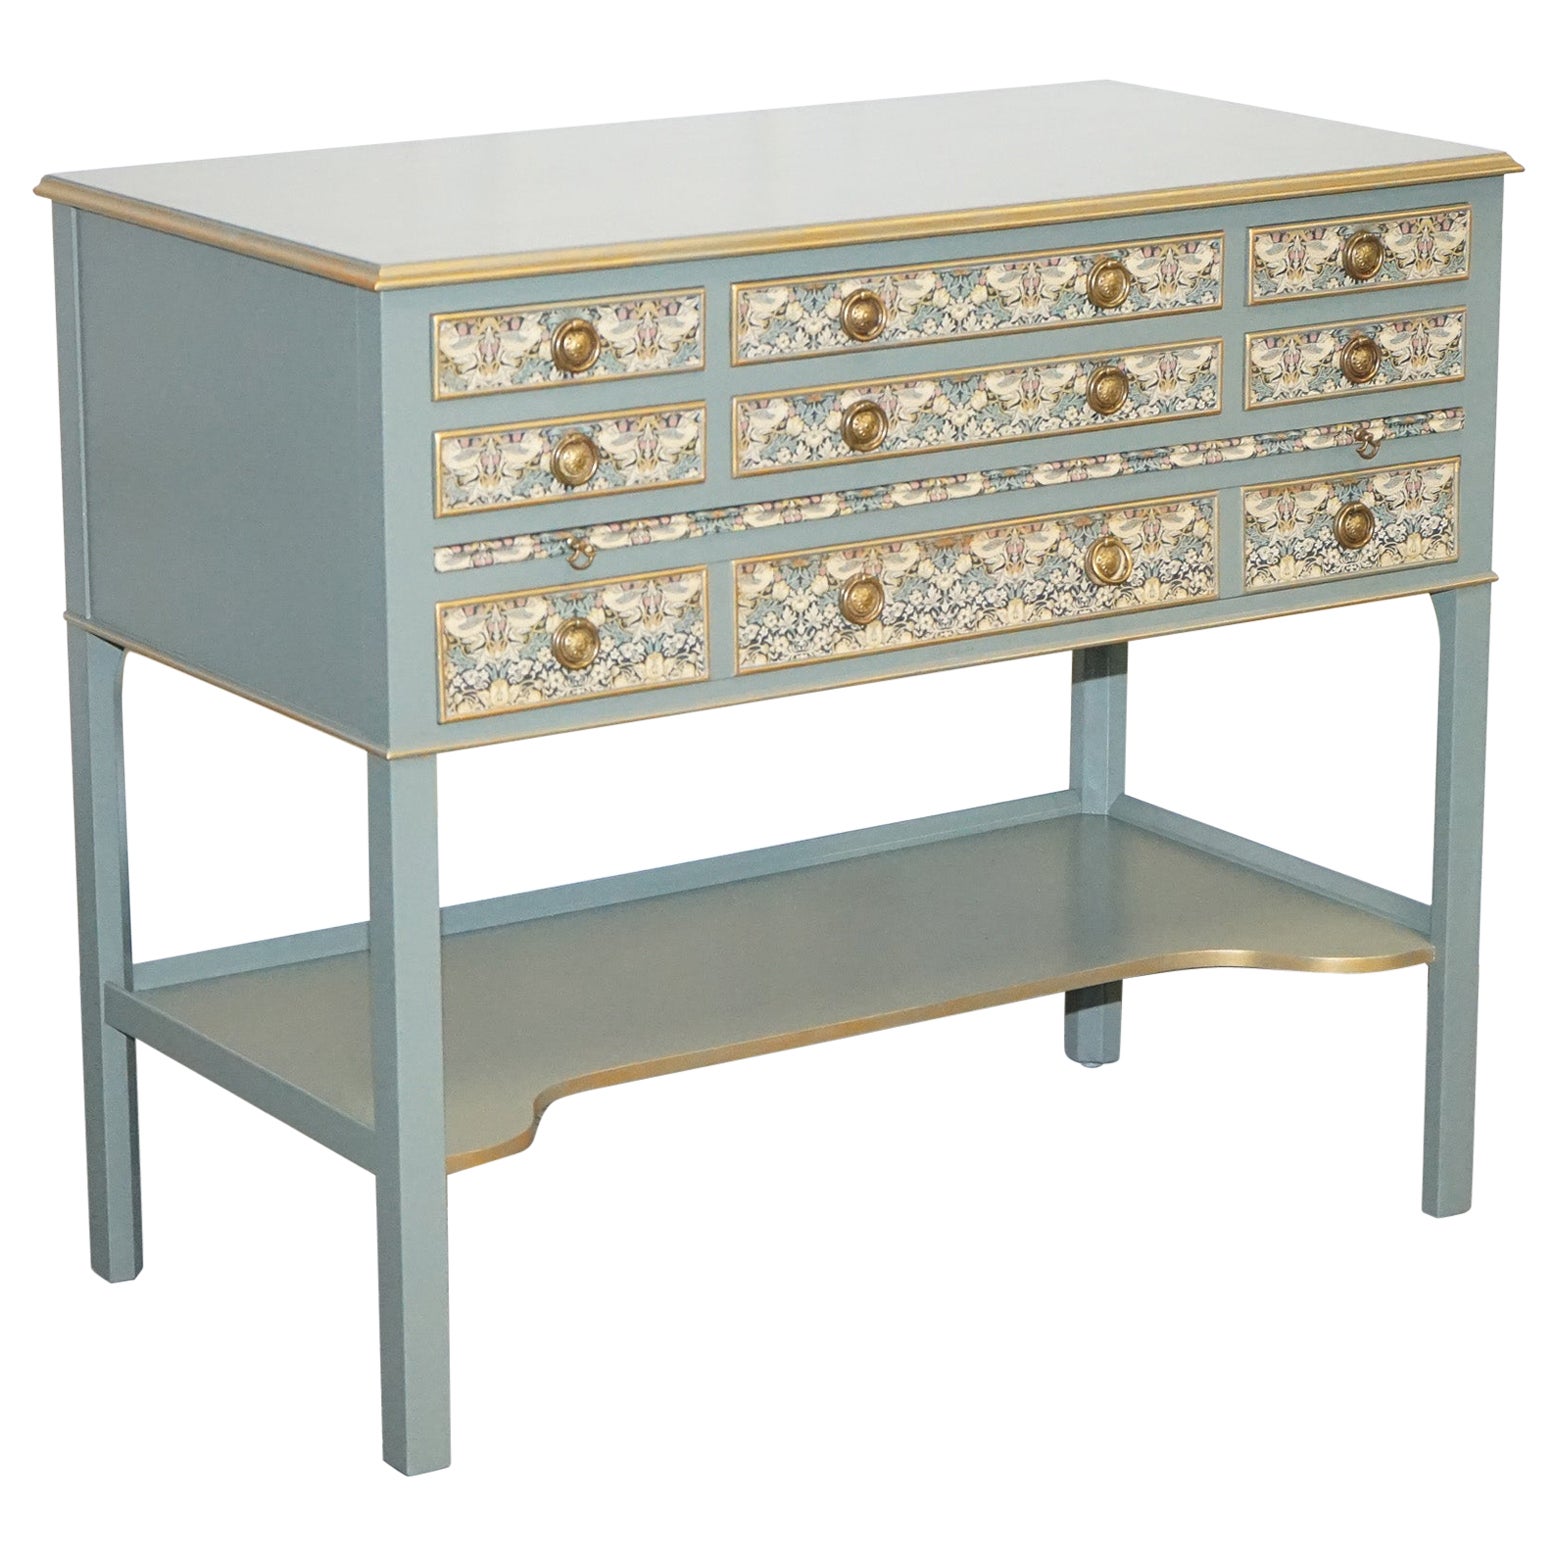 Eucalyptus Green & Gold Console Table Sideboard Strawberry Thief William Morris  For Sale